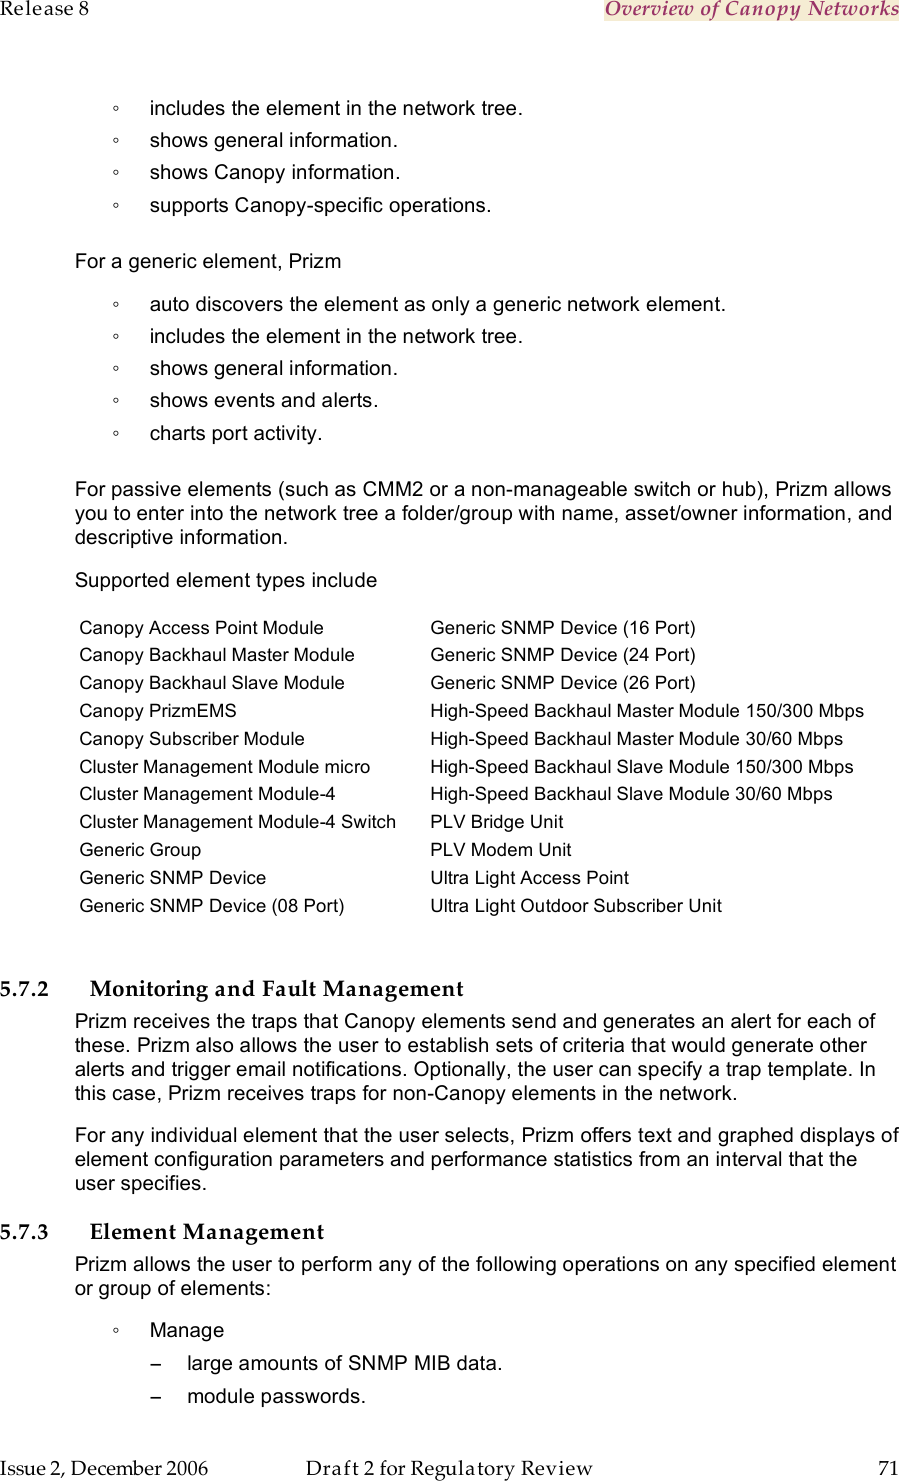 Release 8    Overview of Canopy Networks                  March 200                  Through Software Release 6.   Issue 2, December 2006  Draft 2 for Regulatory Review  71     ◦  includes the element in the network tree. ◦  shows general information. ◦  shows Canopy information. ◦  supports Canopy-specific operations.  For a generic element, Prizm ◦  auto discovers the element as only a generic network element. ◦  includes the element in the network tree. ◦  shows general information. ◦  shows events and alerts. ◦  charts port activity.  For passive elements (such as CMM2 or a non-manageable switch or hub), Prizm allows you to enter into the network tree a folder/group with name, asset/owner information, and descriptive information. Supported element types include Canopy Access Point Module Canopy Backhaul Master Module Canopy Backhaul Slave Module Canopy PrizmEMS Canopy Subscriber Module Cluster Management Module micro Cluster Management Module-4 Cluster Management Module-4 Switch Generic Group Generic SNMP Device Generic SNMP Device (08 Port) Generic SNMP Device (16 Port) Generic SNMP Device (24 Port) Generic SNMP Device (26 Port) High-Speed Backhaul Master Module 150/300 Mbps High-Speed Backhaul Master Module 30/60 Mbps High-Speed Backhaul Slave Module 150/300 Mbps High-Speed Backhaul Slave Module 30/60 Mbps PLV Bridge Unit PLV Modem Unit Ultra Light Access Point Ultra Light Outdoor Subscriber Unit   5.7.2 Monitoring and Fault Management Prizm receives the traps that Canopy elements send and generates an alert for each of these. Prizm also allows the user to establish sets of criteria that would generate other alerts and trigger email notifications. Optionally, the user can specify a trap template. In this case, Prizm receives traps for non-Canopy elements in the network. For any individual element that the user selects, Prizm offers text and graphed displays of element configuration parameters and performance statistics from an interval that the user specifies.  5.7.3 Element Management Prizm allows the user to perform any of the following operations on any specified element or group of elements: ◦  Manage  −  large amounts of SNMP MIB data. −  module passwords. 